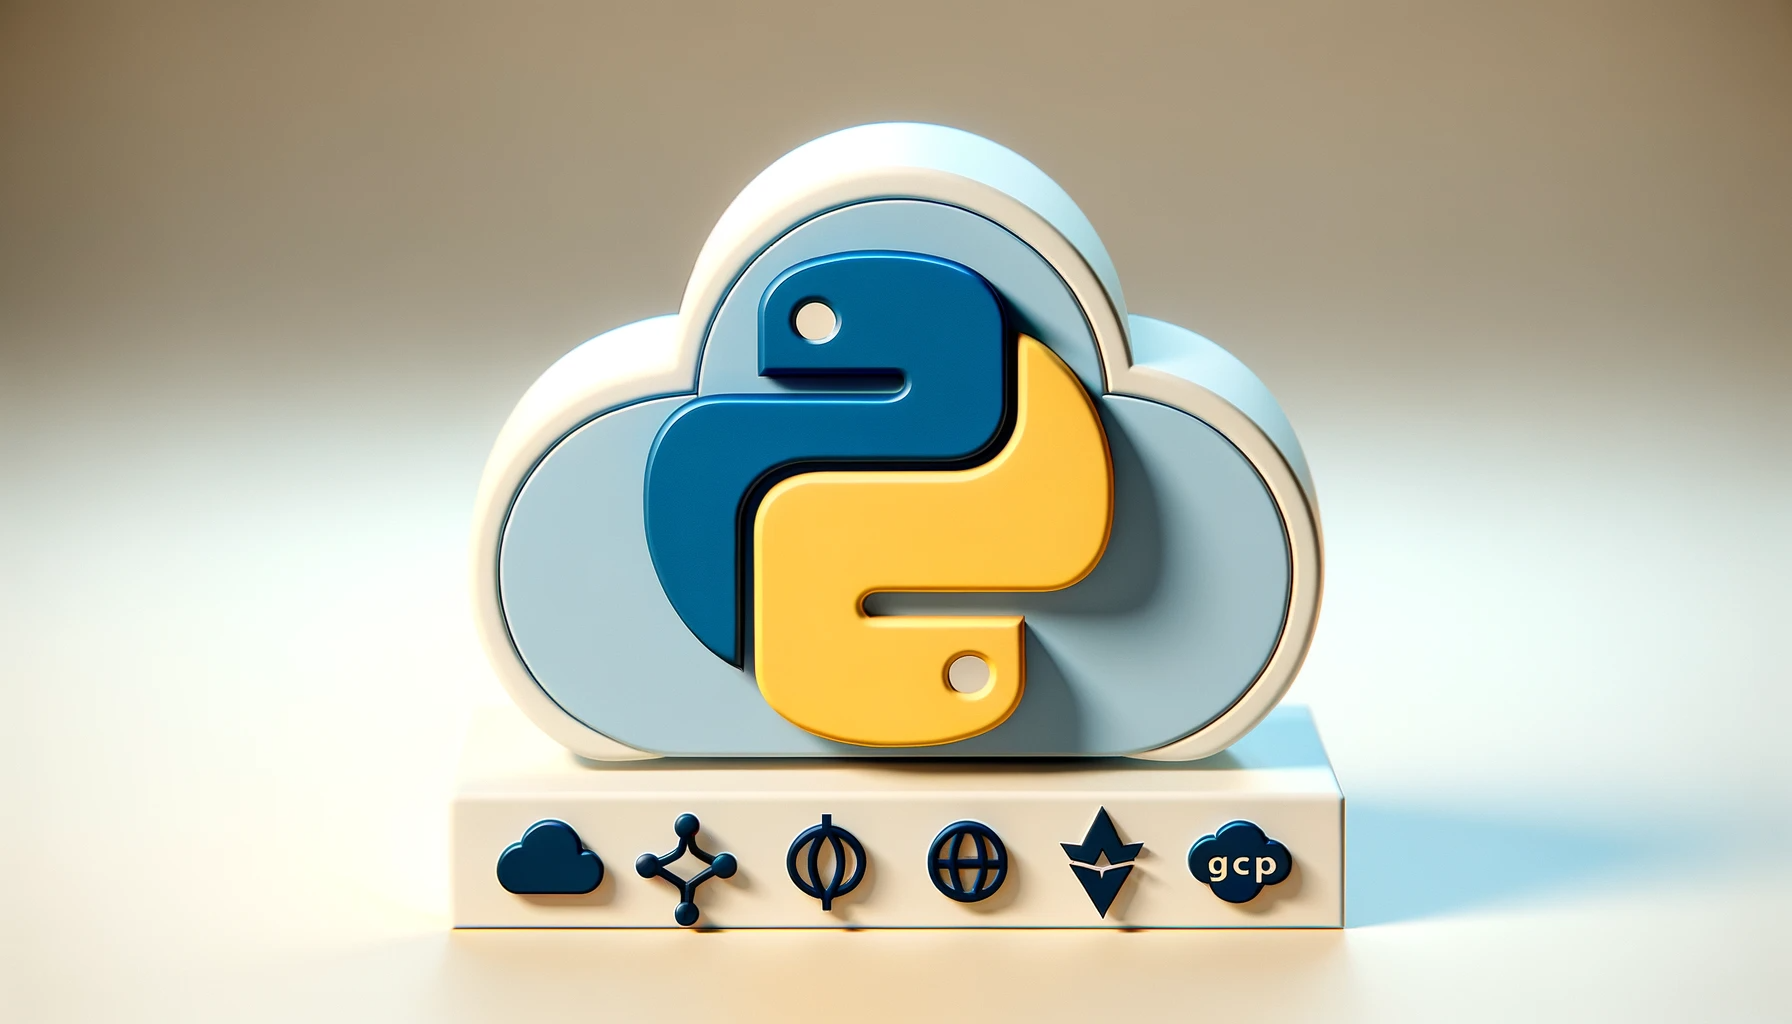 Schedule a Python Script to Run Periodically on a Cloud Server